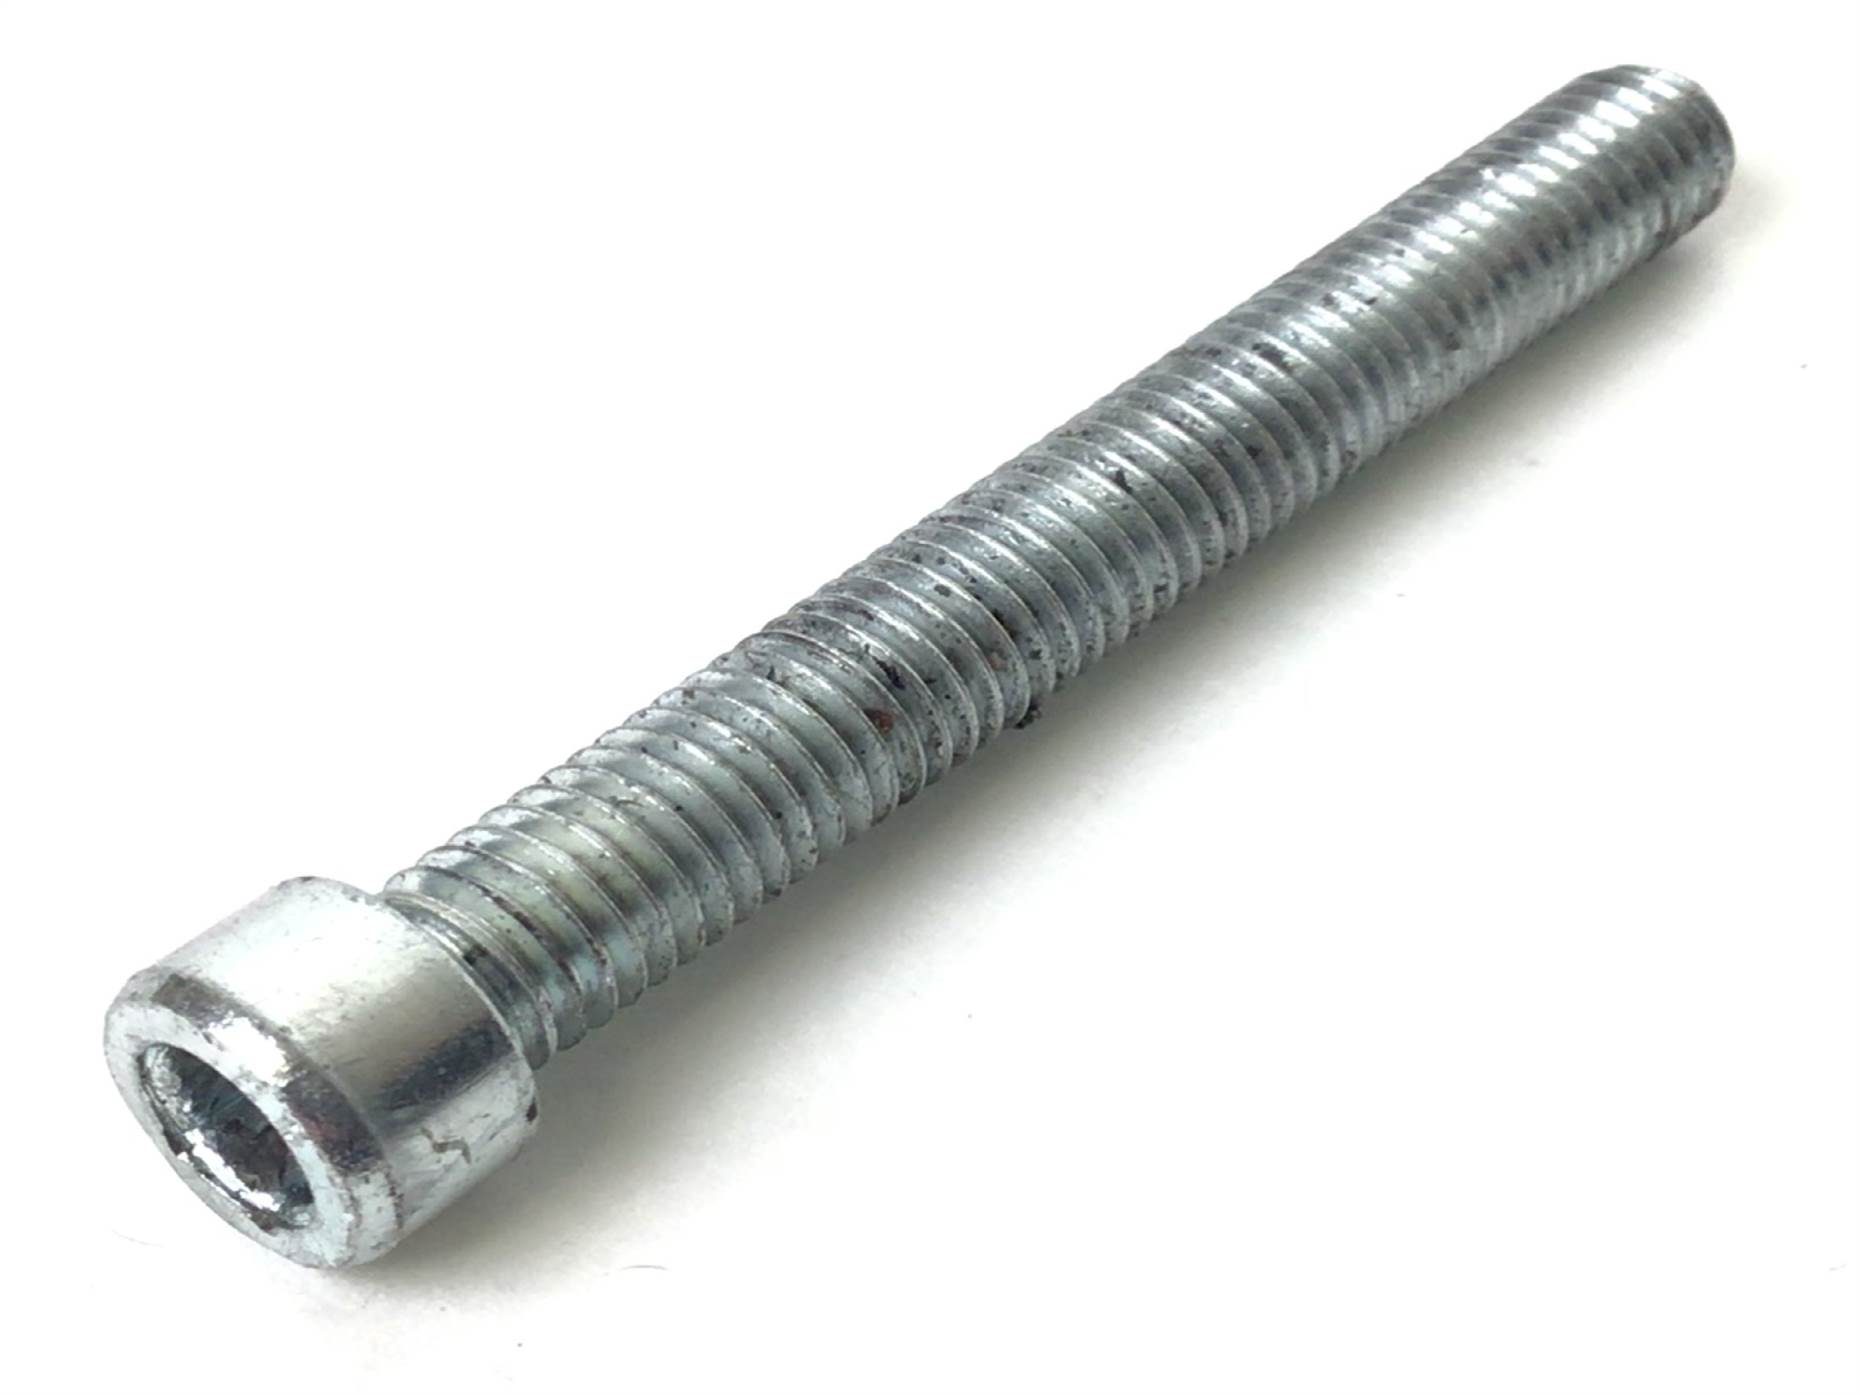 Bolt M8-1.25-65.5mm (Used)